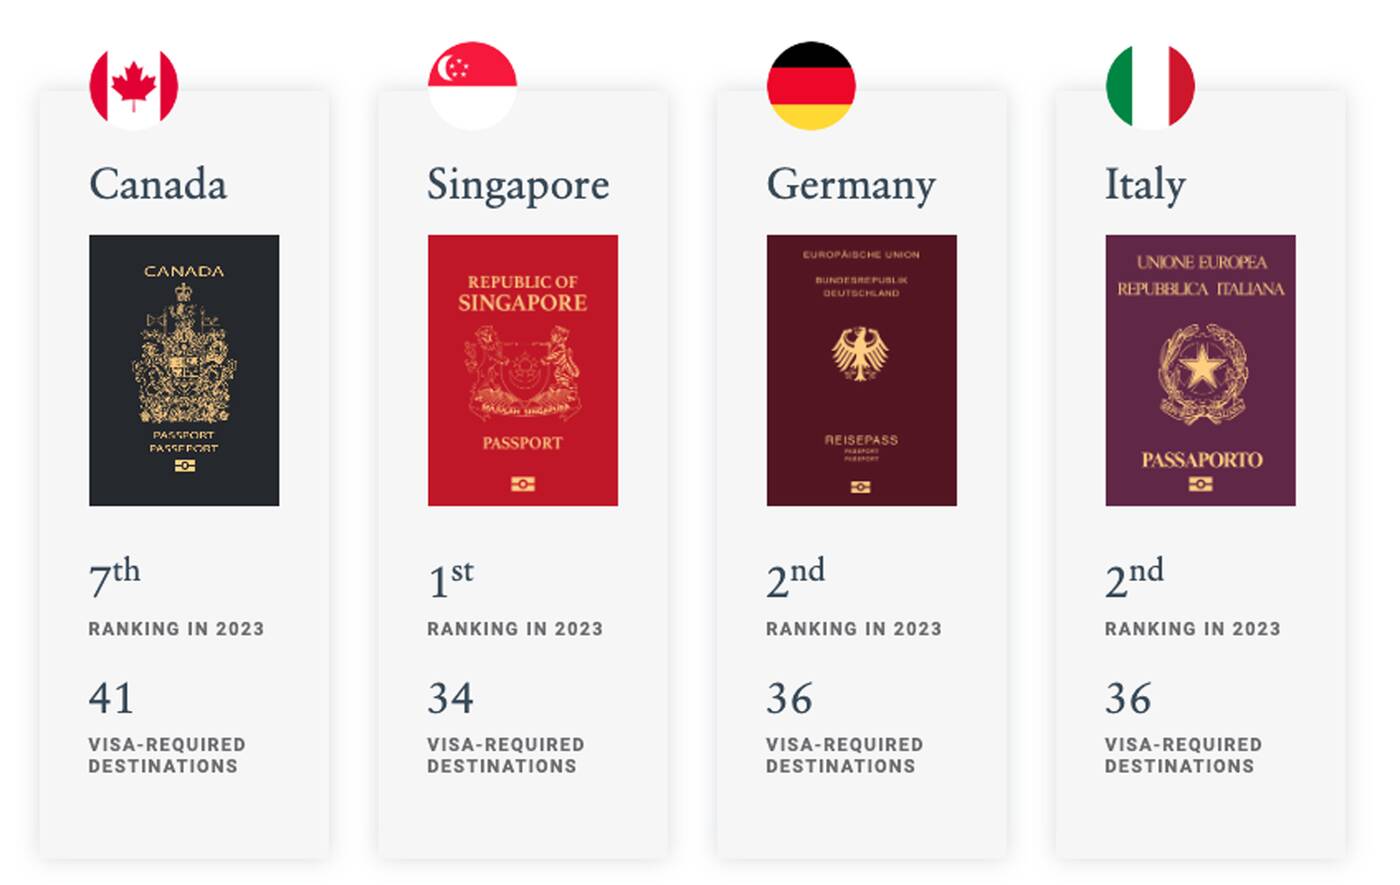 Costa Rica ranks 31st in the list of the strongest passports in the world